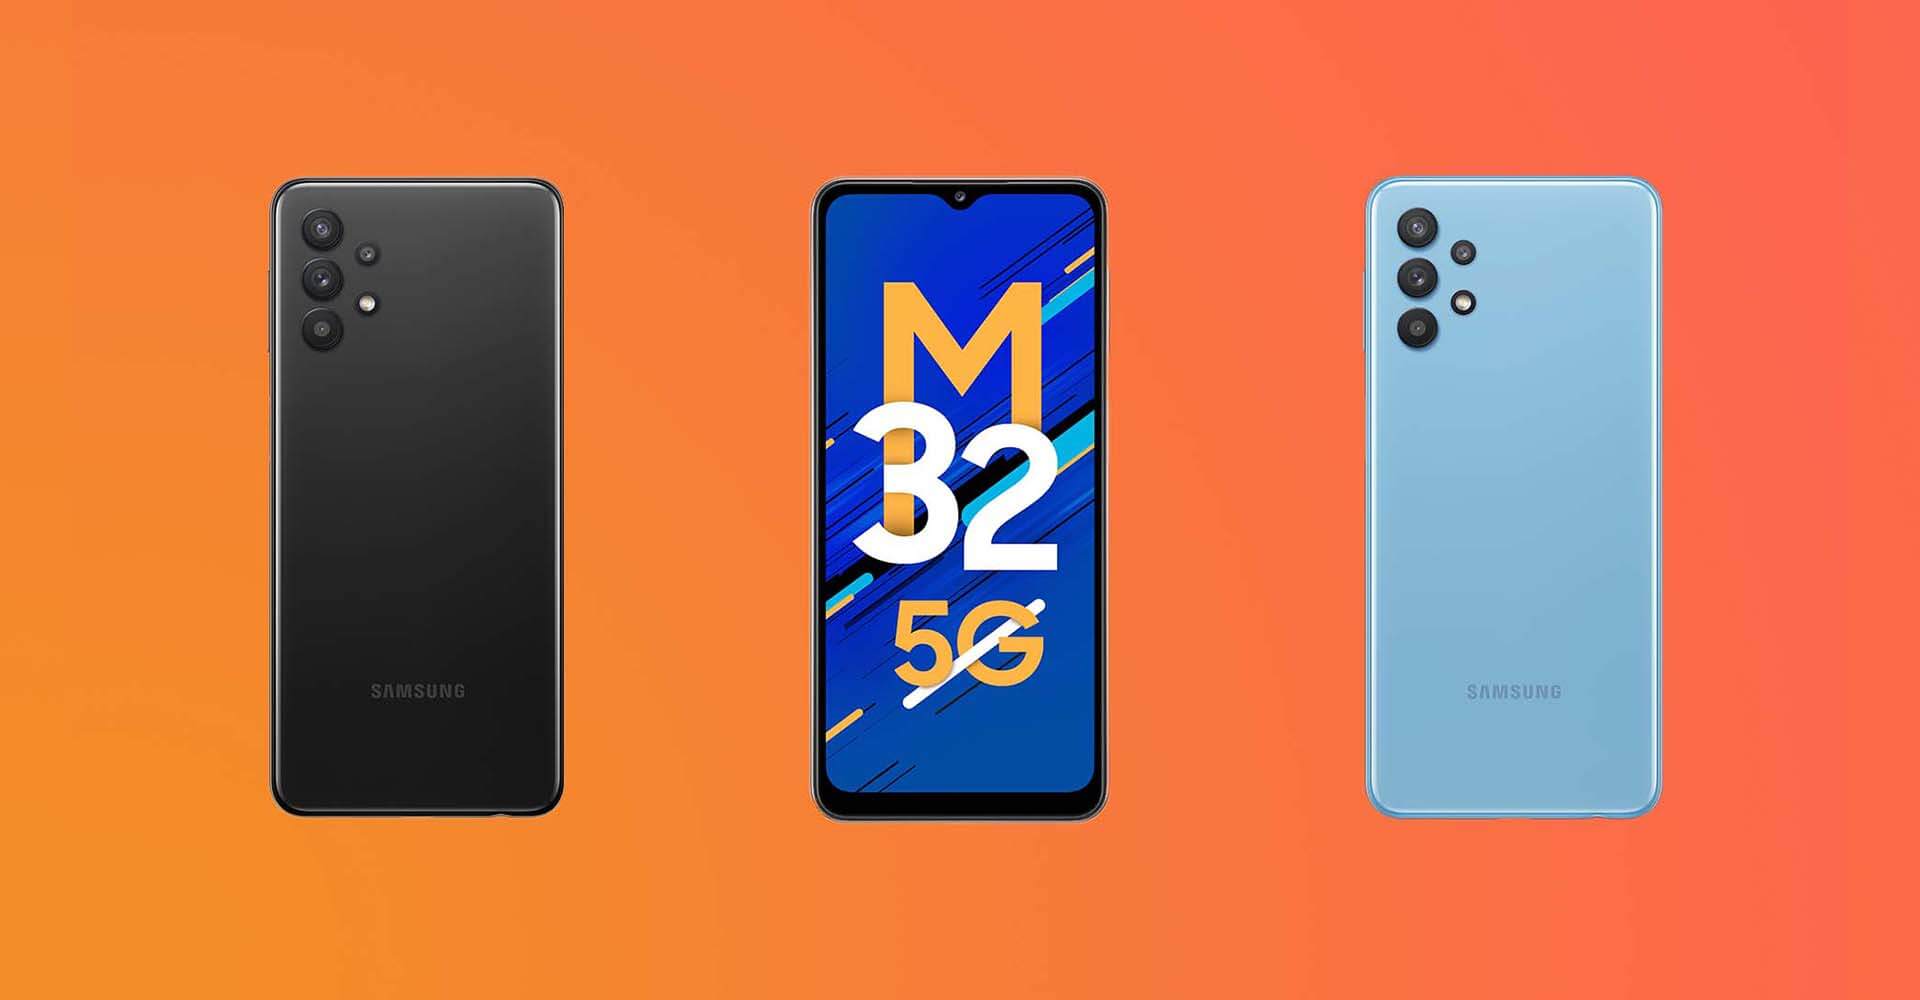 Will Samsung Galaxy M32 5G Get Android 13 (One UI 5.0) Update?